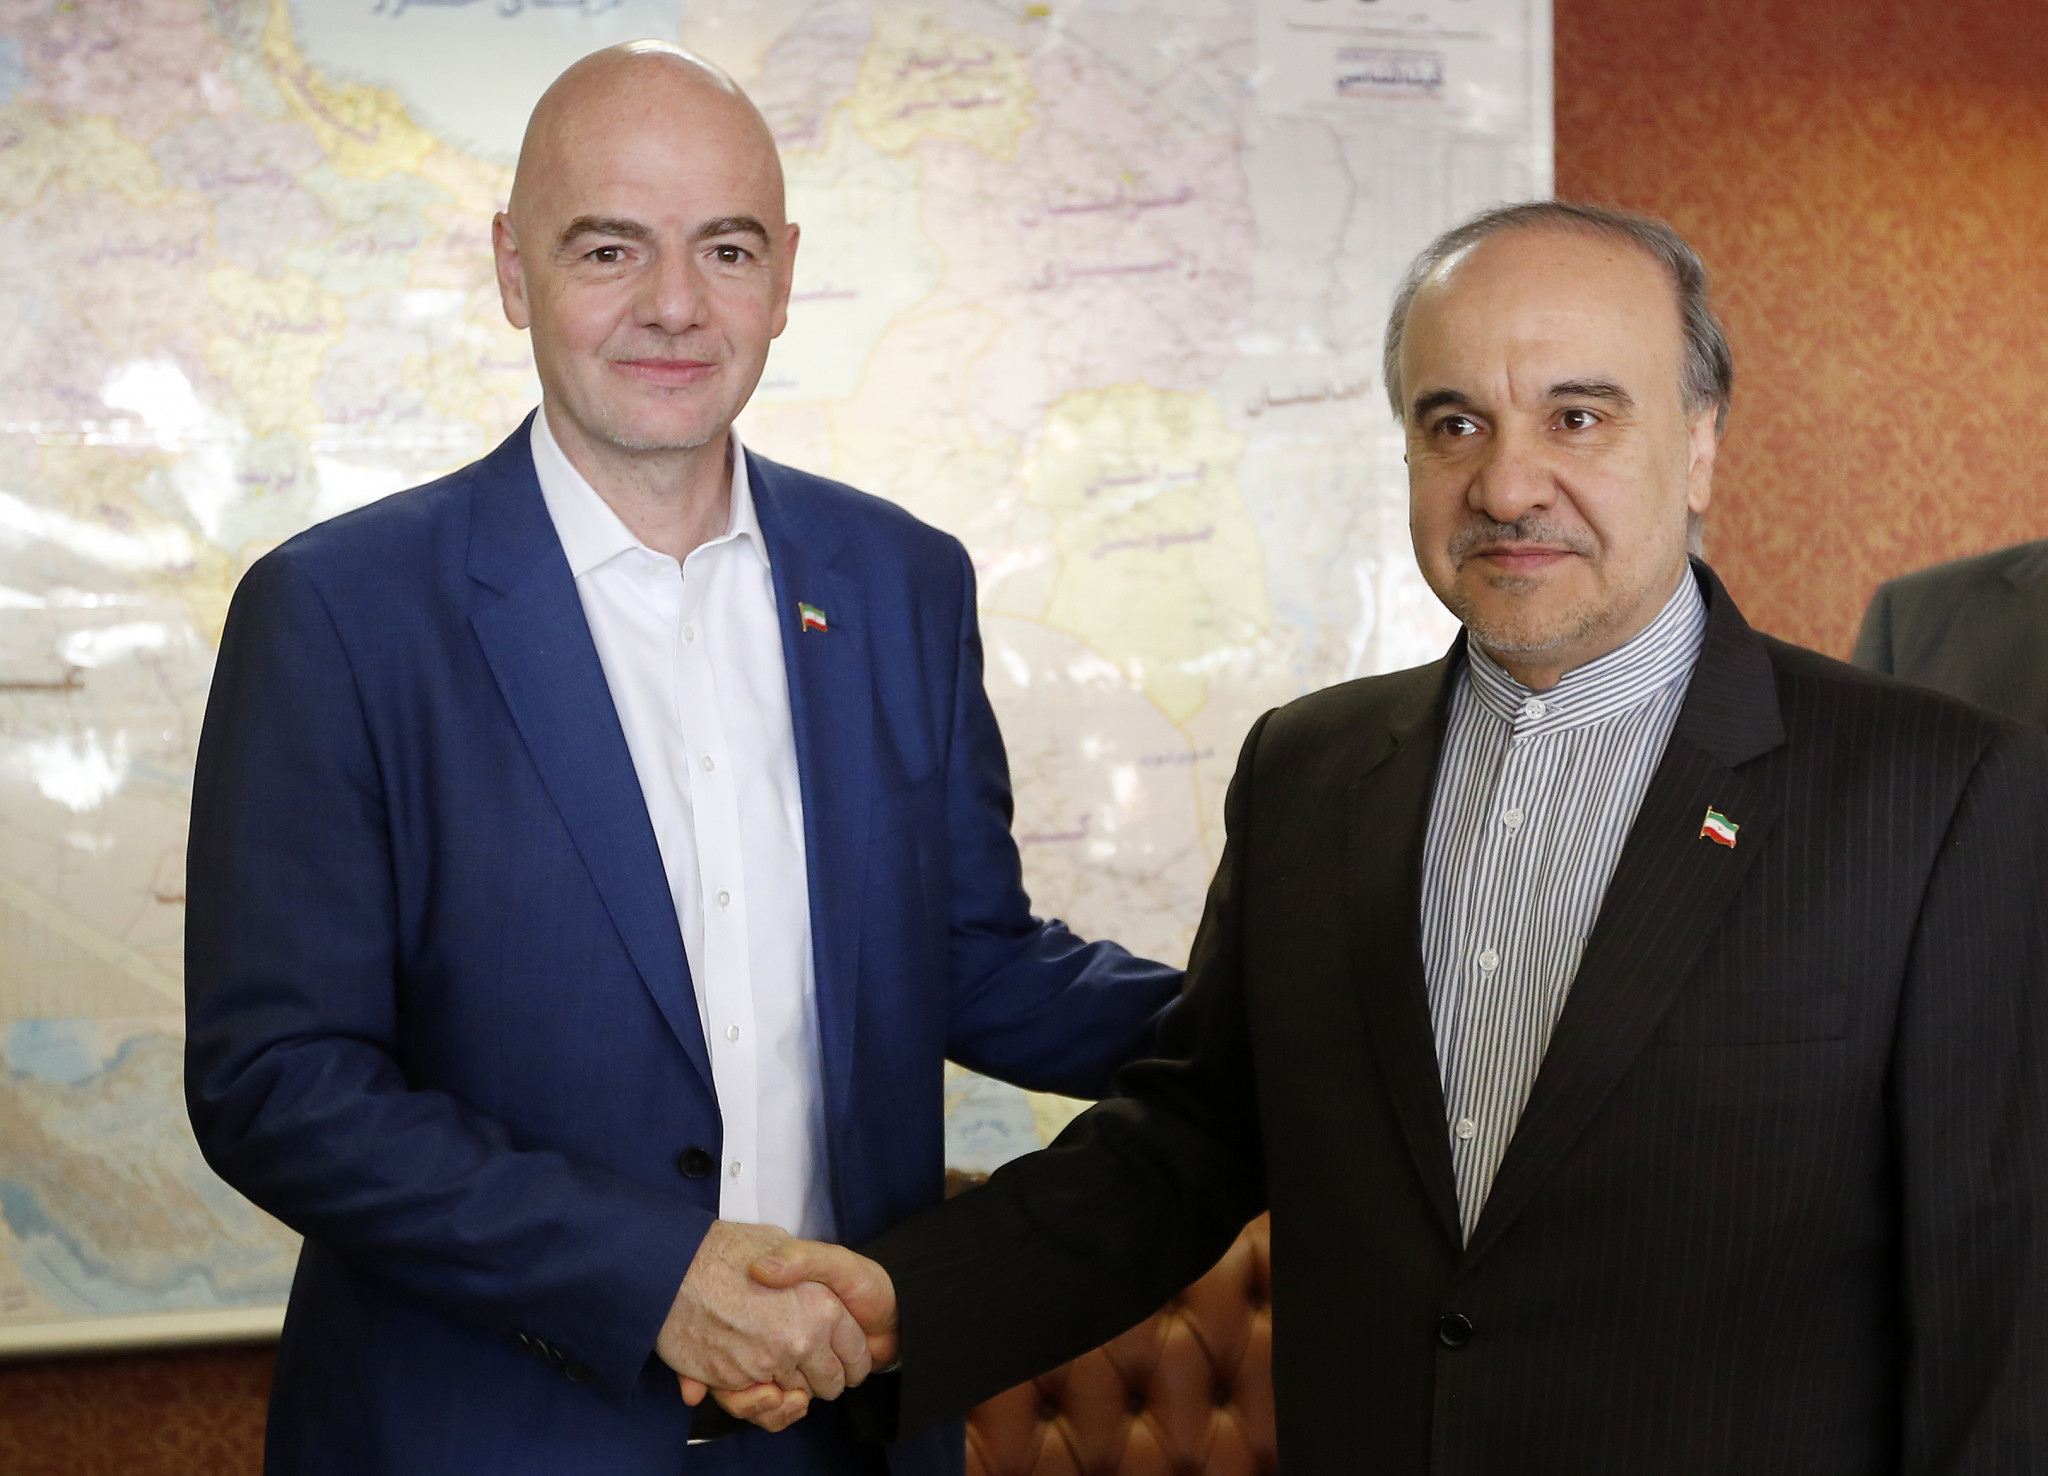 FIFA President Gianni Infantino met Iran's Minister of Youth Affairs and Sports Masoud Soltanifar on a visit to the country in December 2018, when the elections were among items discussed ©Getty Images